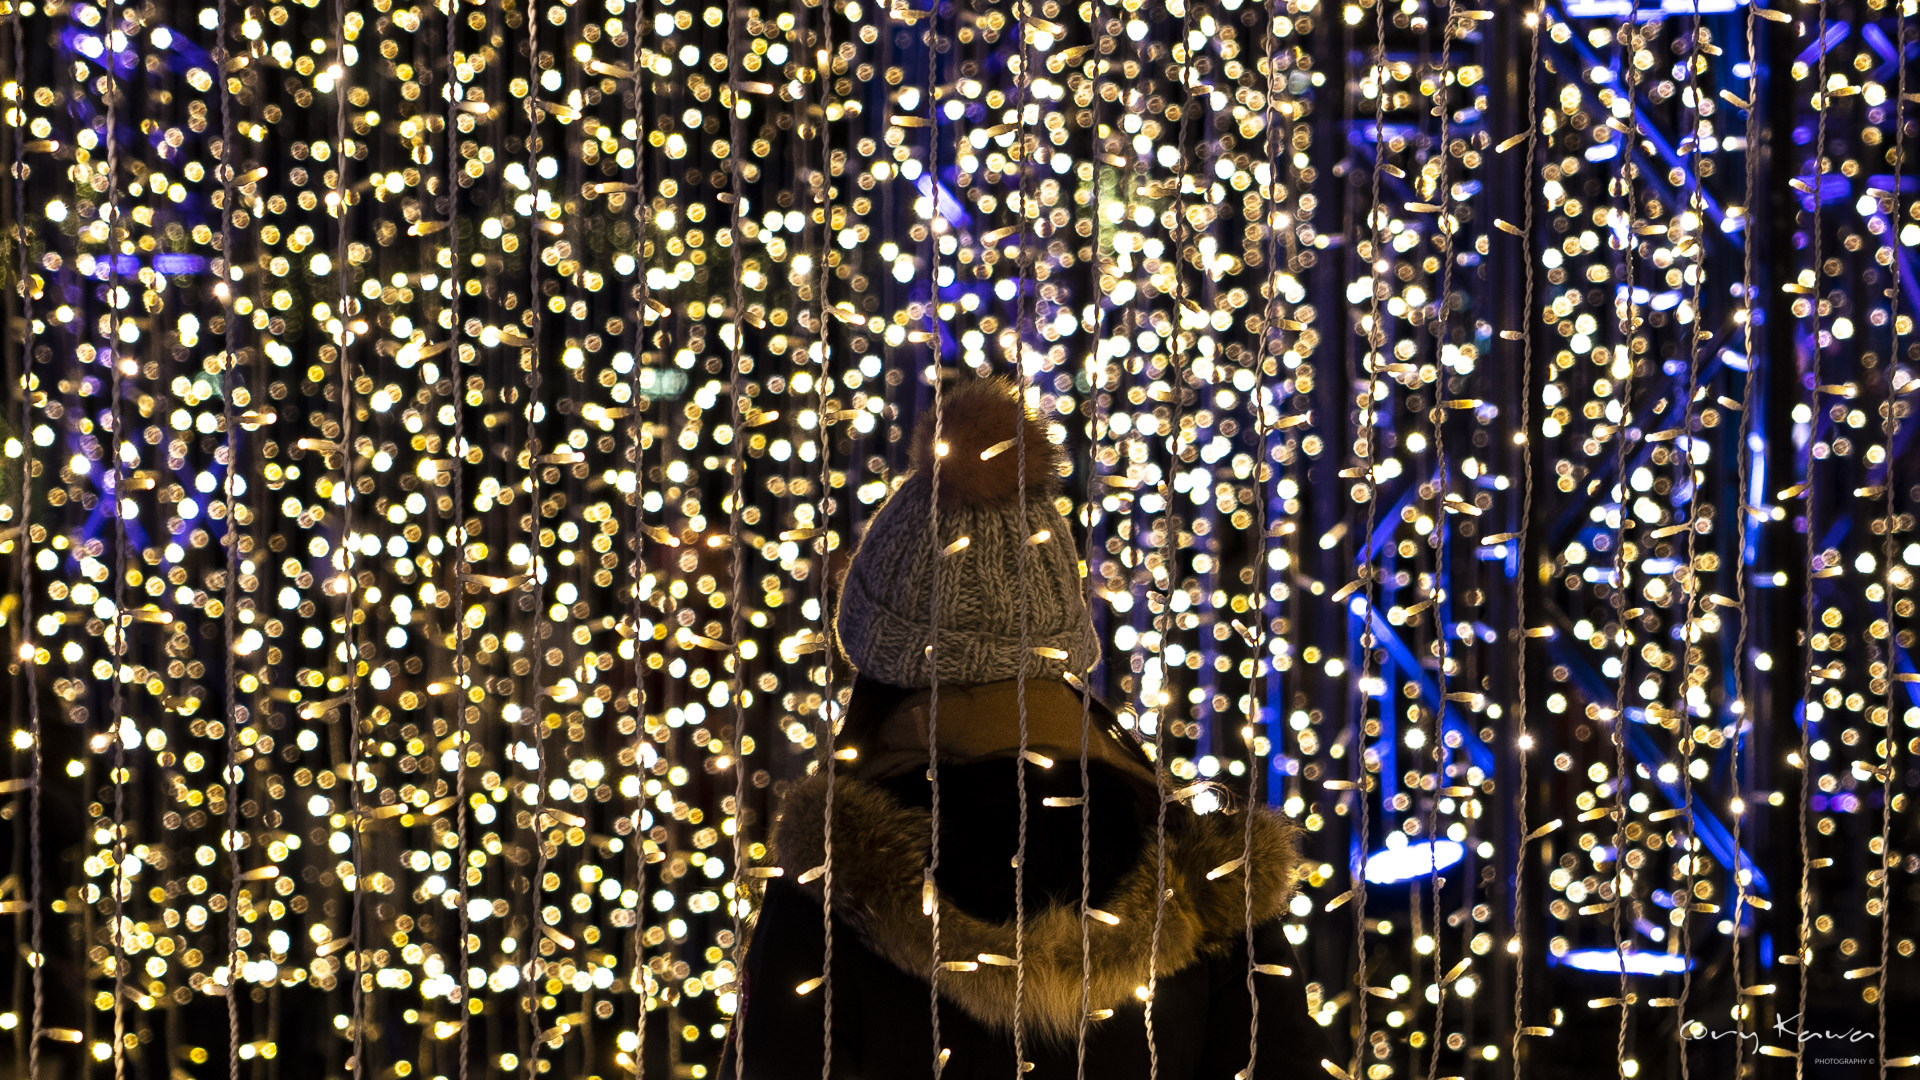 The back of a lady surrounded by thousands of christmas lights